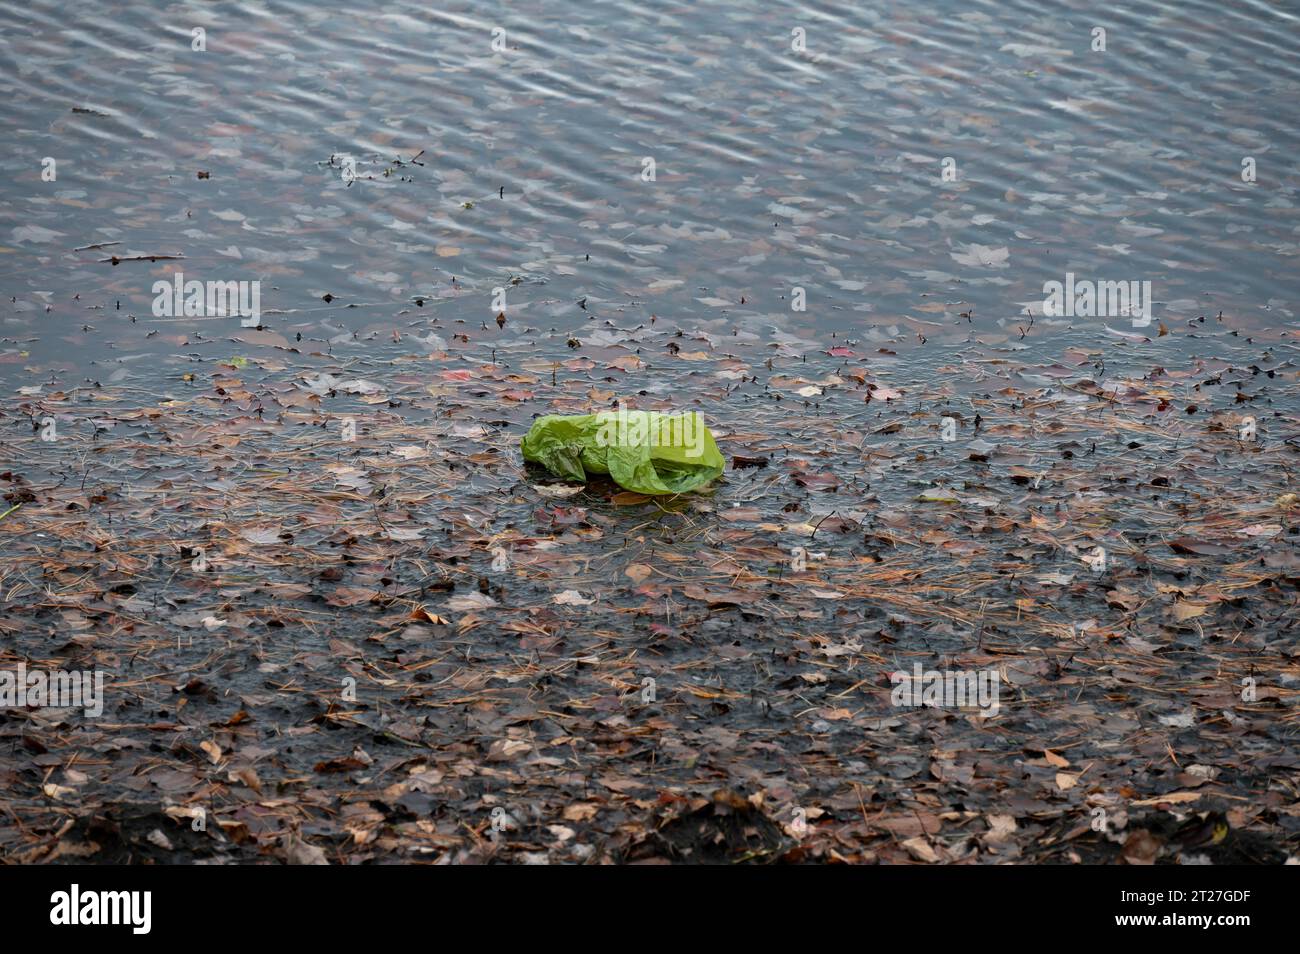 A green plastic bag washing up on shore in the autumn leaves on Lake Pleasant in Speculator, NY, USA Stock Photo